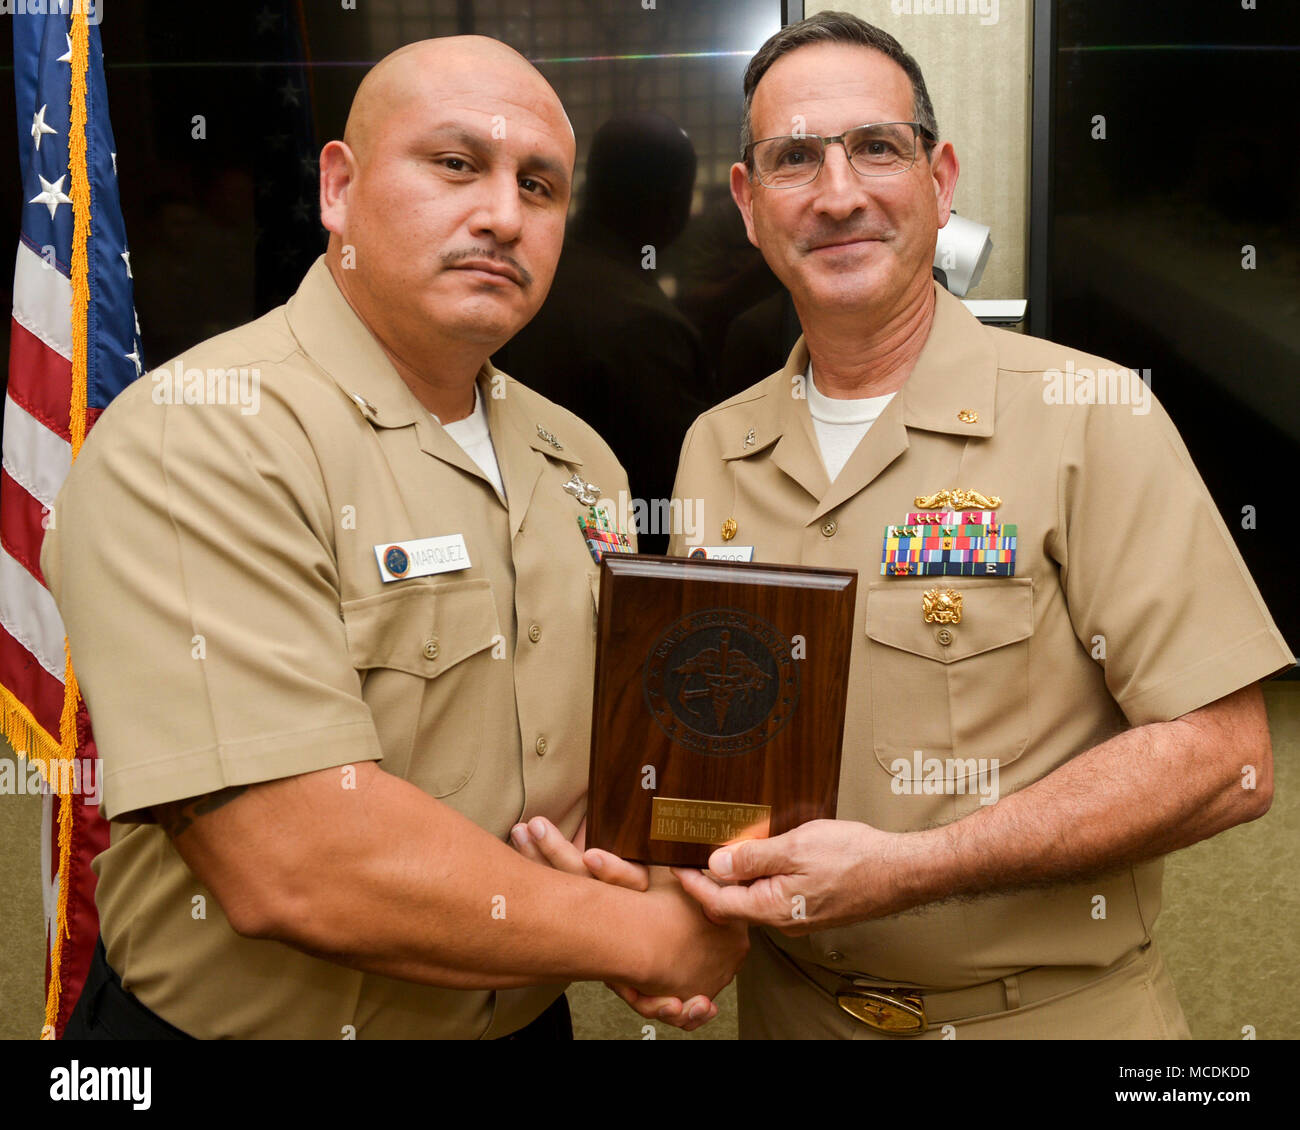 180216-N-PN275-1027 SAN DIEGO (Feb. 16, 2018) CAPT. Joel Roos, Naval Medical Center San Diego Commanding Officer,  presents Hospital Corpsman 1st Class Phillip Marquez with the Senior Sailor of the Quarter award. Hospital Corpsman 1st Class Marquez received the award for his exceptional work and devotion to duty. (U.S. Navy Photo by Mass Communication Specialist 2nd Class Zachary Kreitzer) Stock Photo